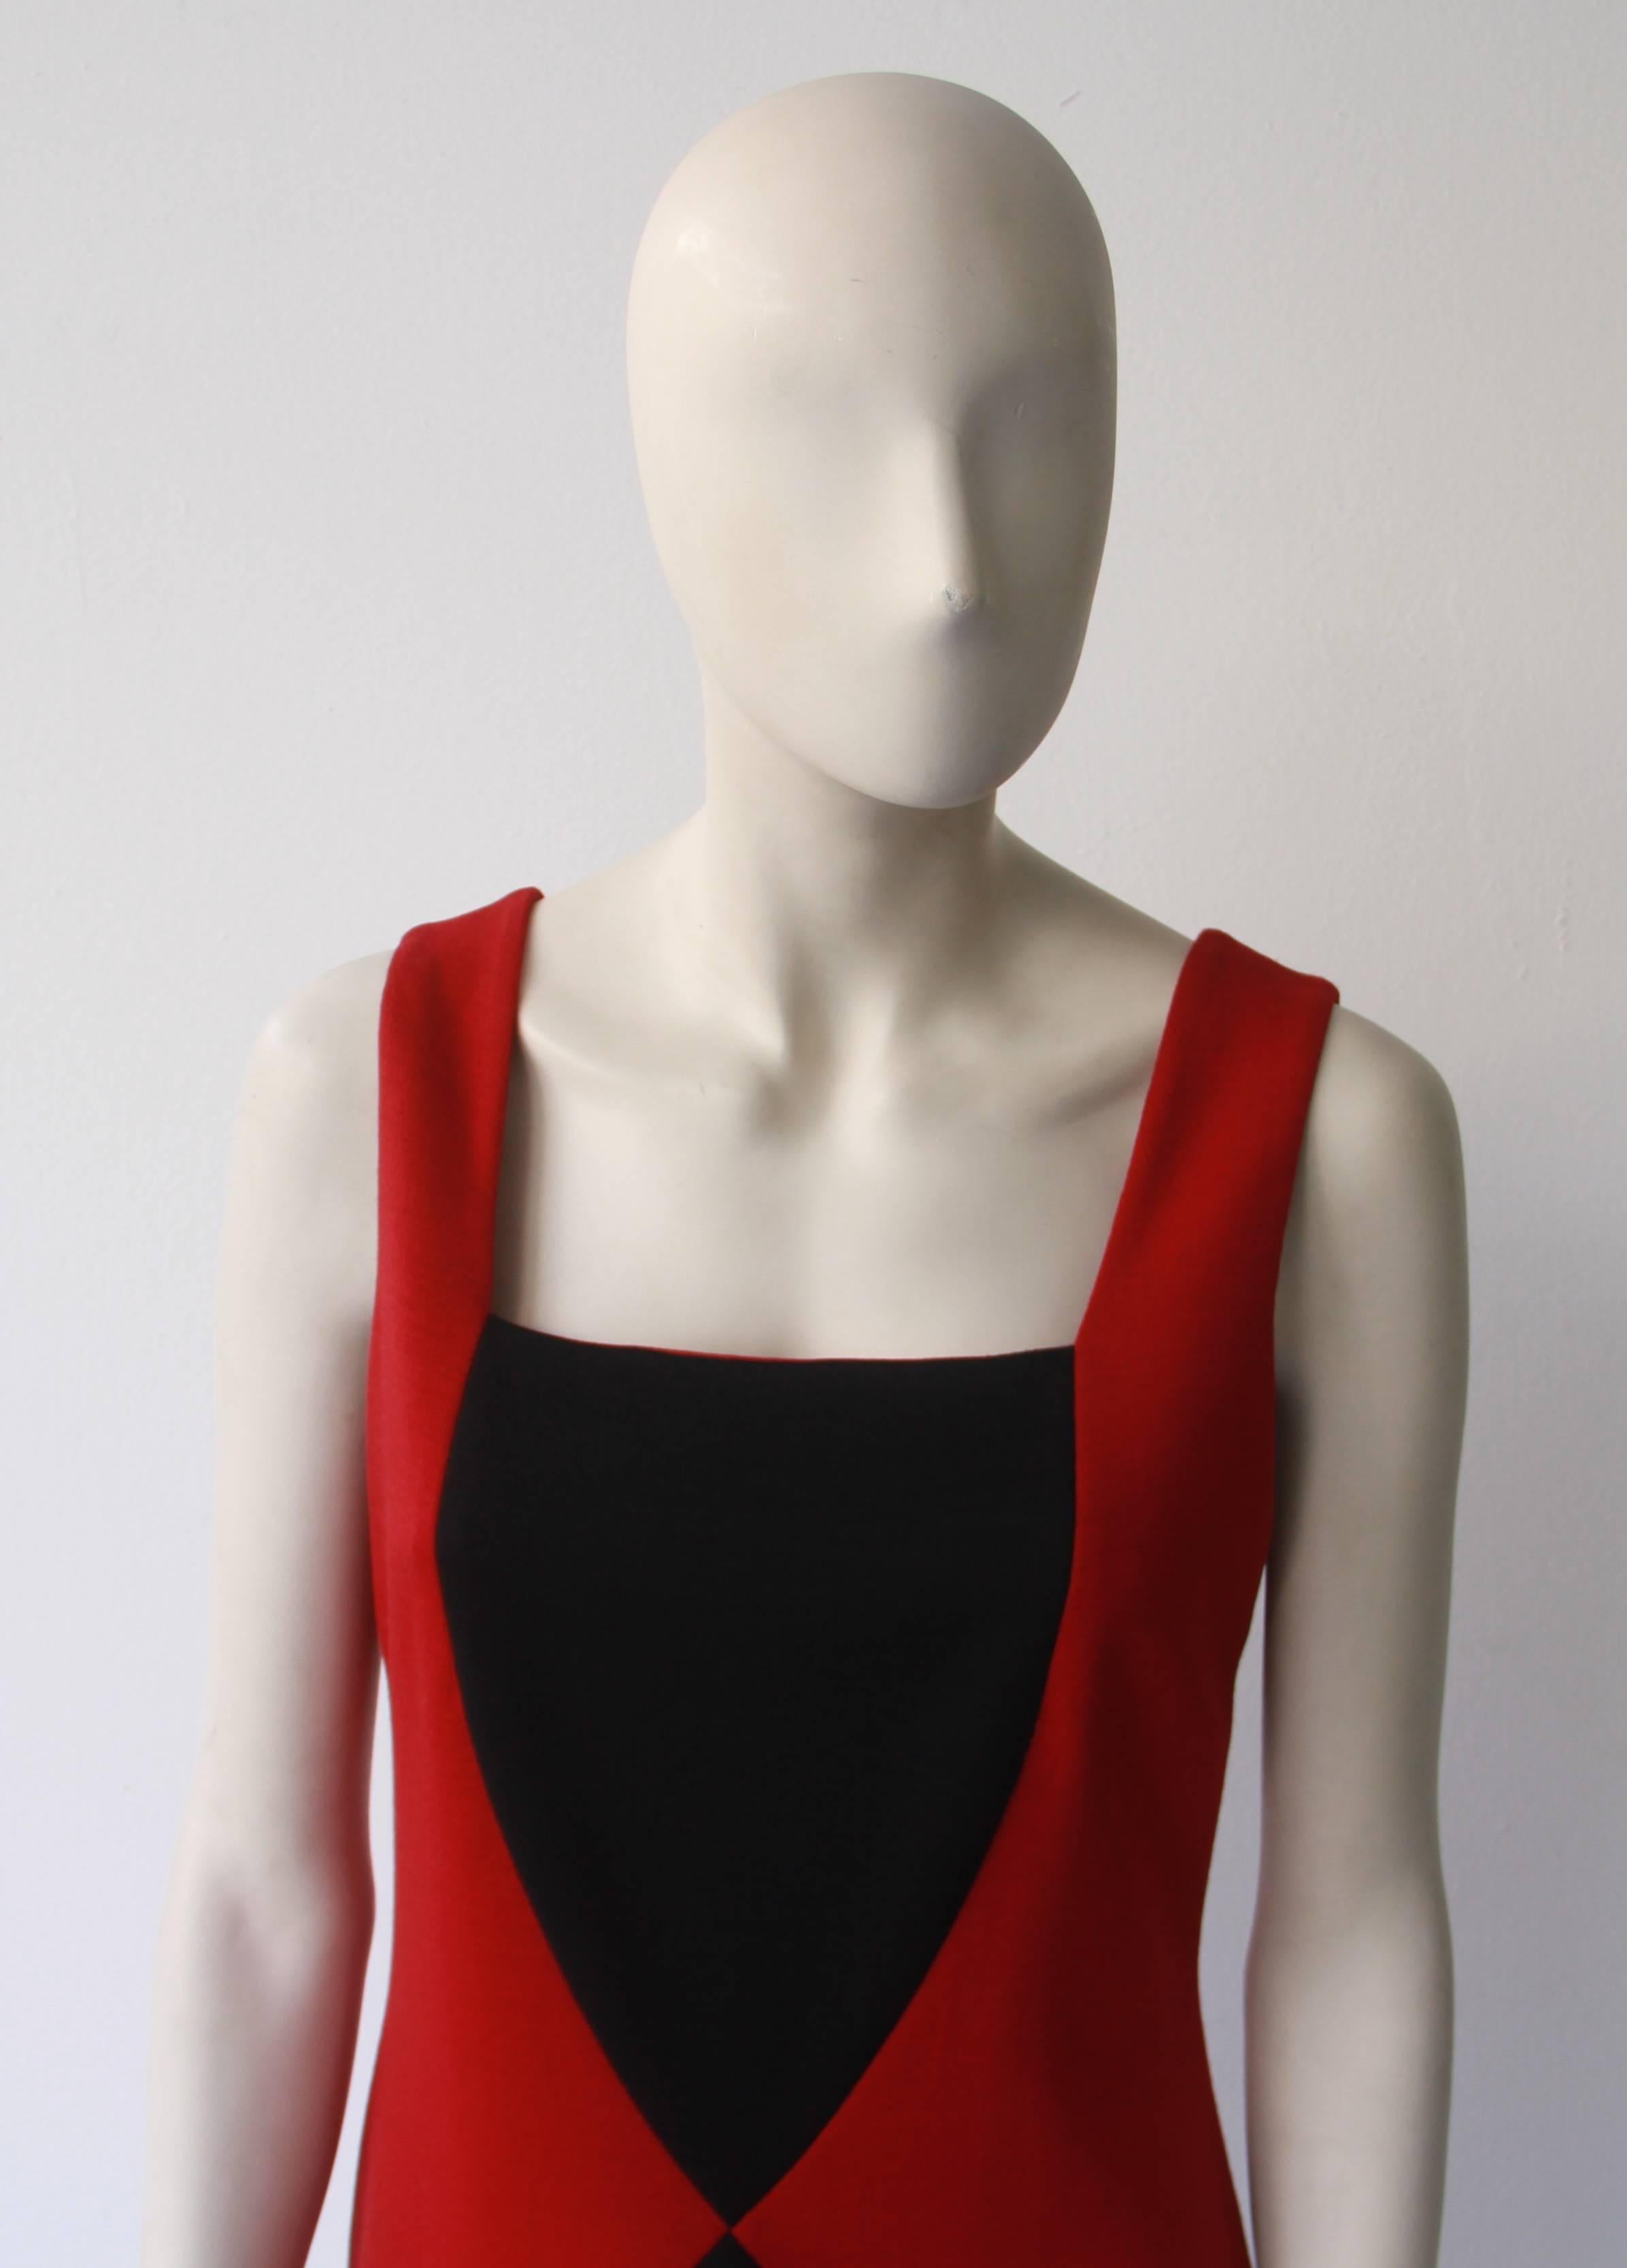 Gianni Versace colour-blocked sleeveless dress from the Fall 1997 collection.

Marked an Italian size 40.

Manufacturer - Alias S.p.a.

Fabric content - 79% wool / 10% acetate / 17% nylon / 4% silk